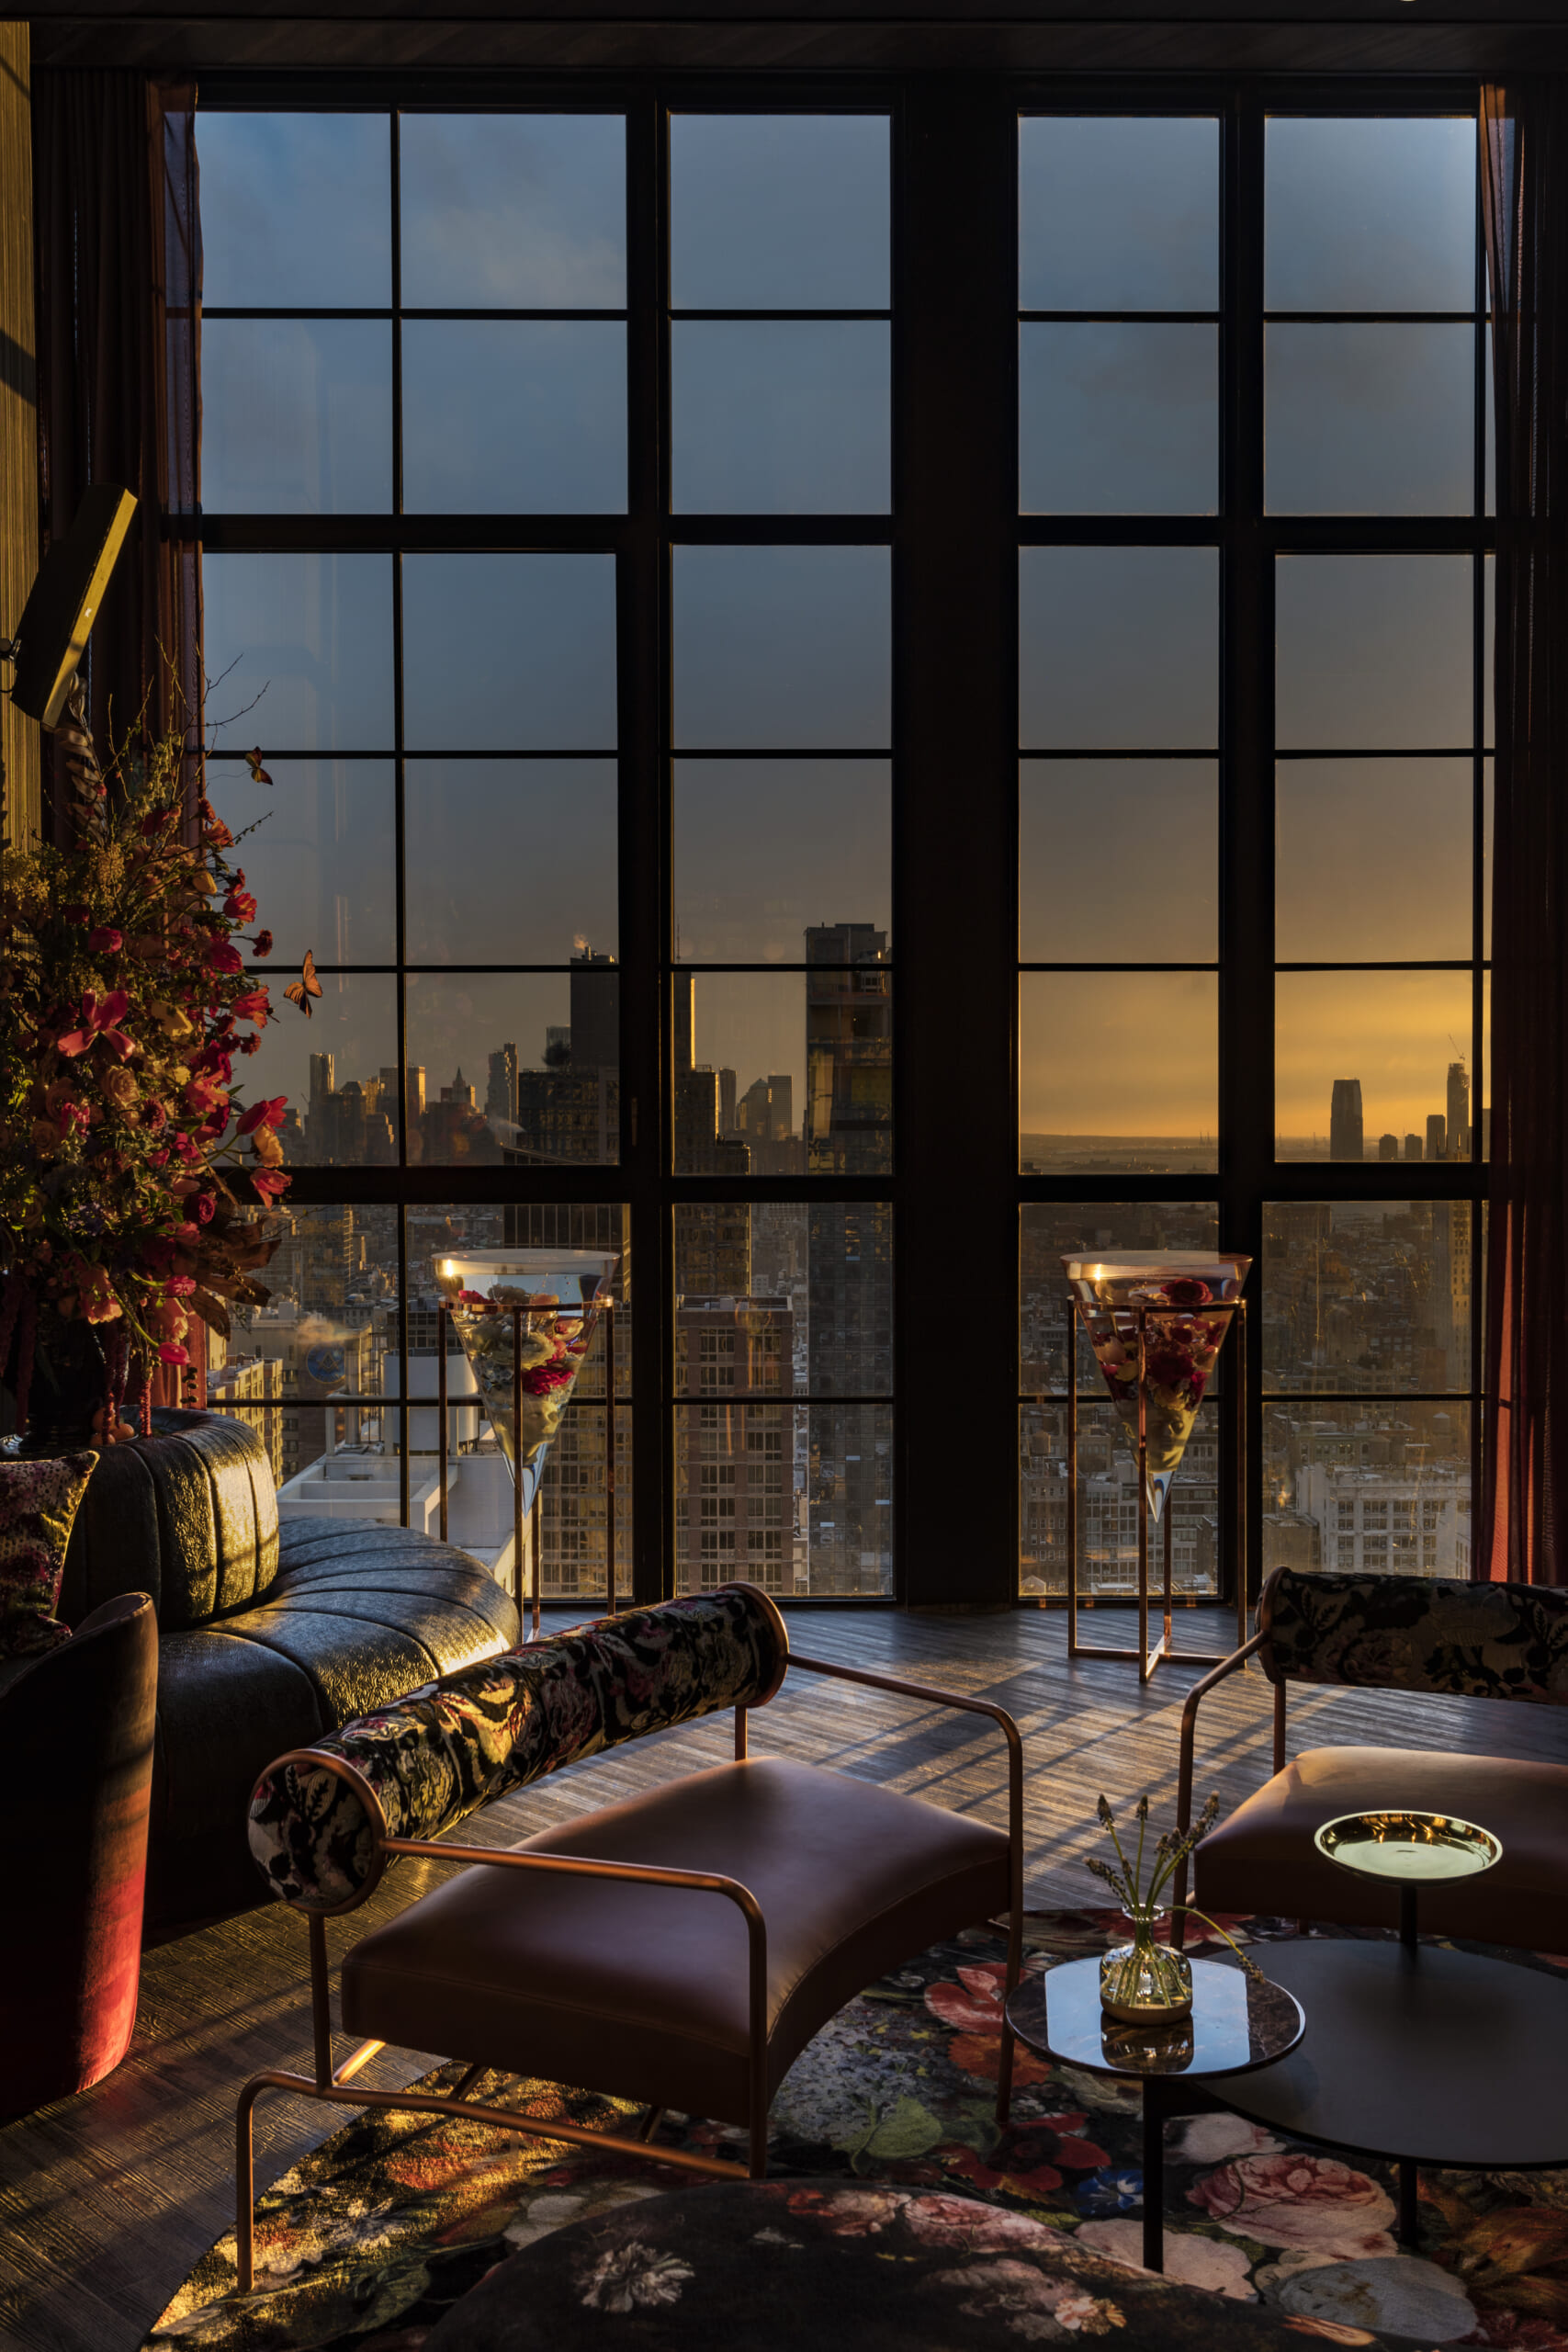 Inside The Fleur Room, The Newest and Highest Rooftop Bar in NYC - Maxim